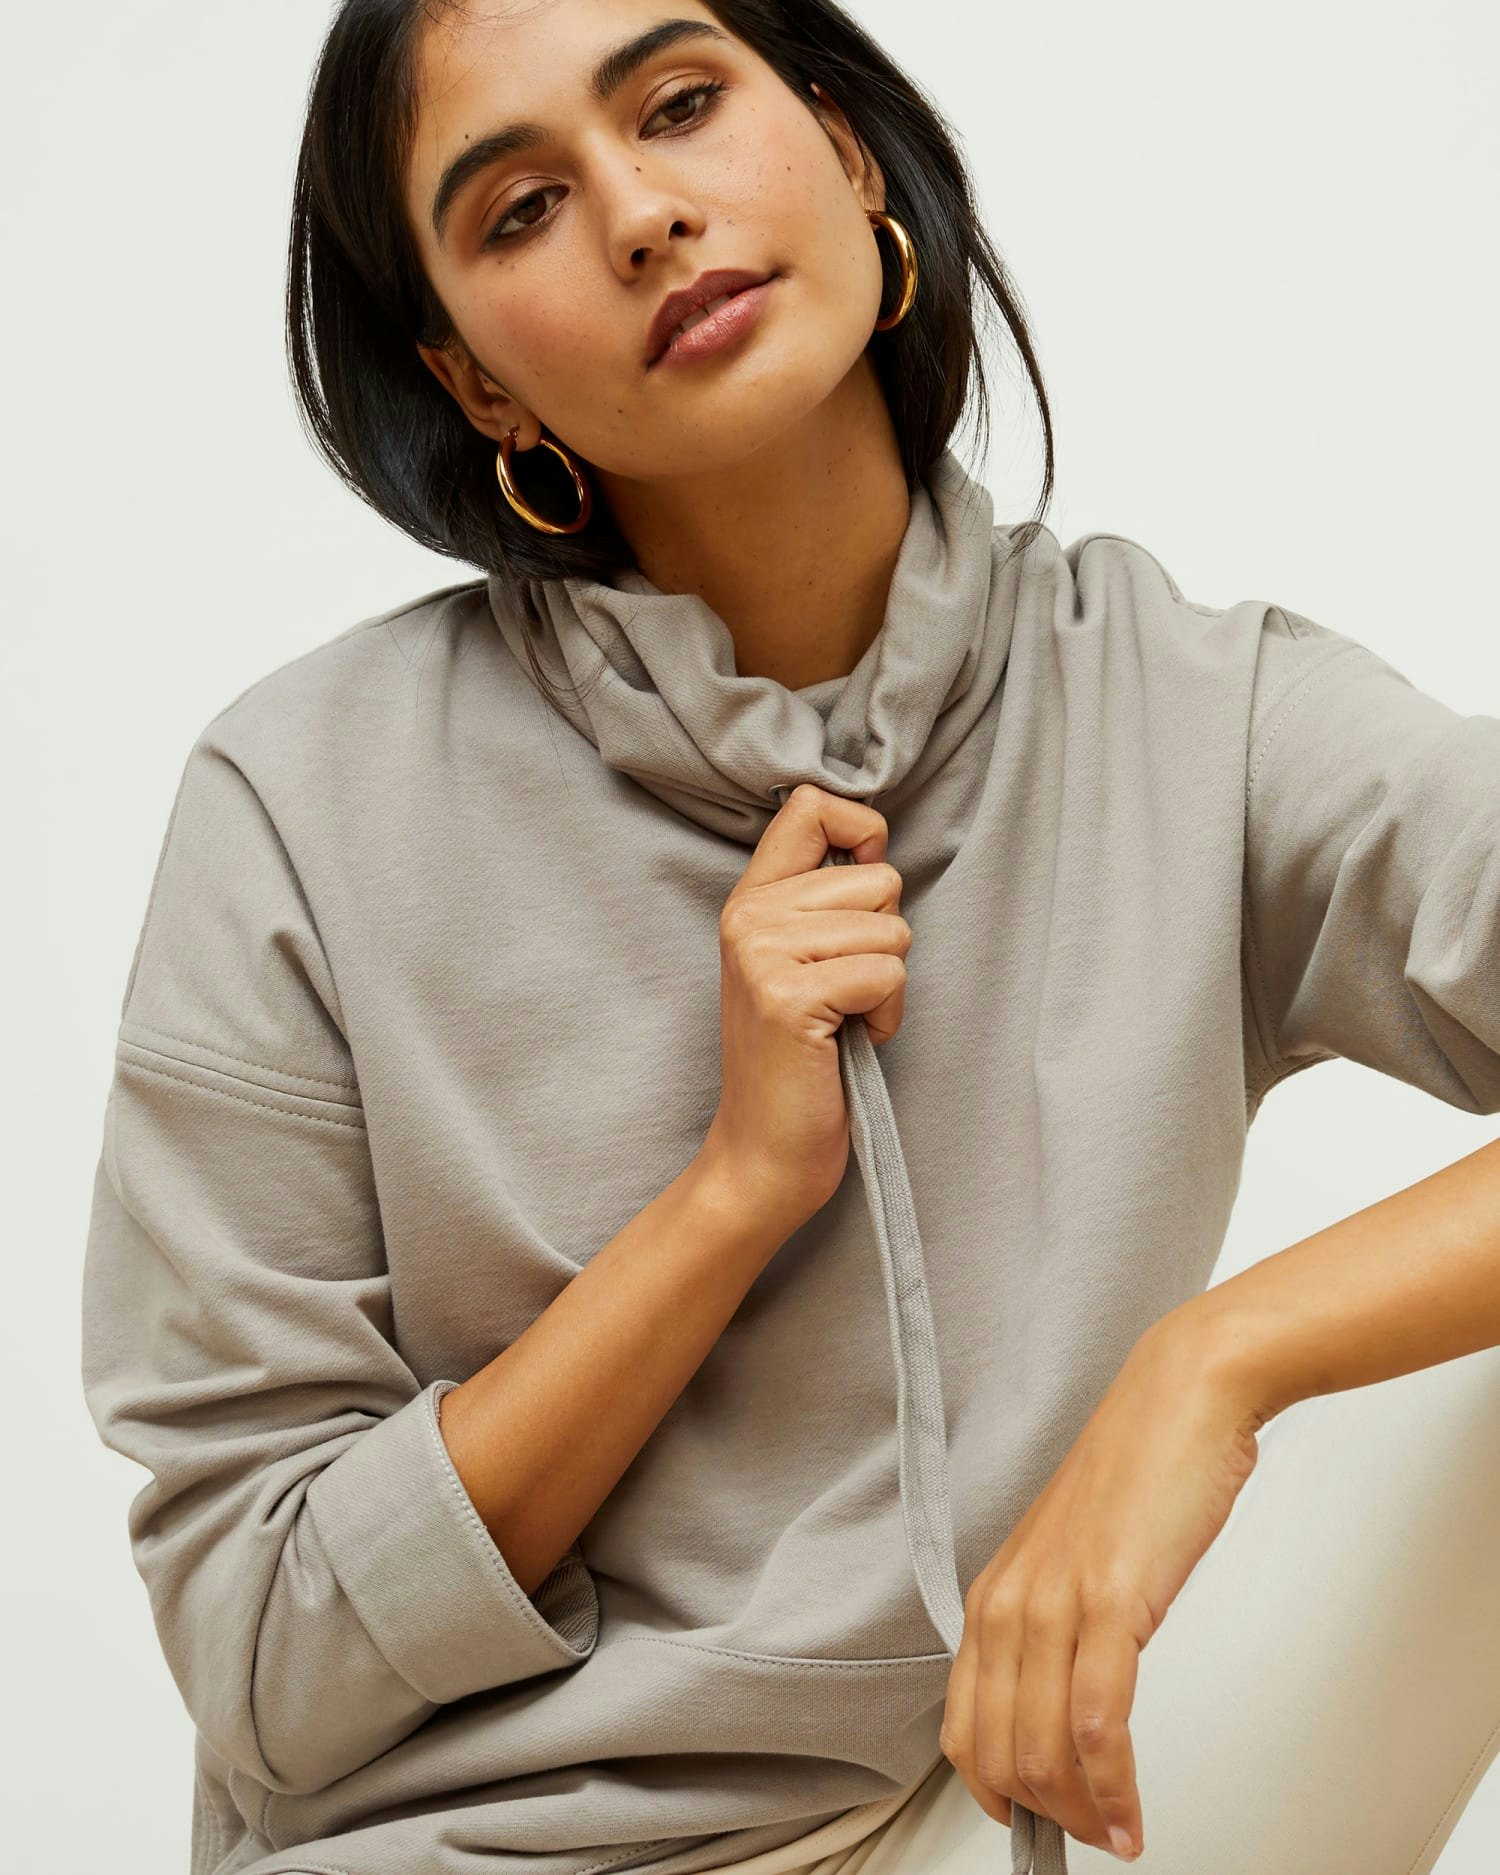 Here's why you'll want Bed Threads' cashmere loungewear in your WFH rotation